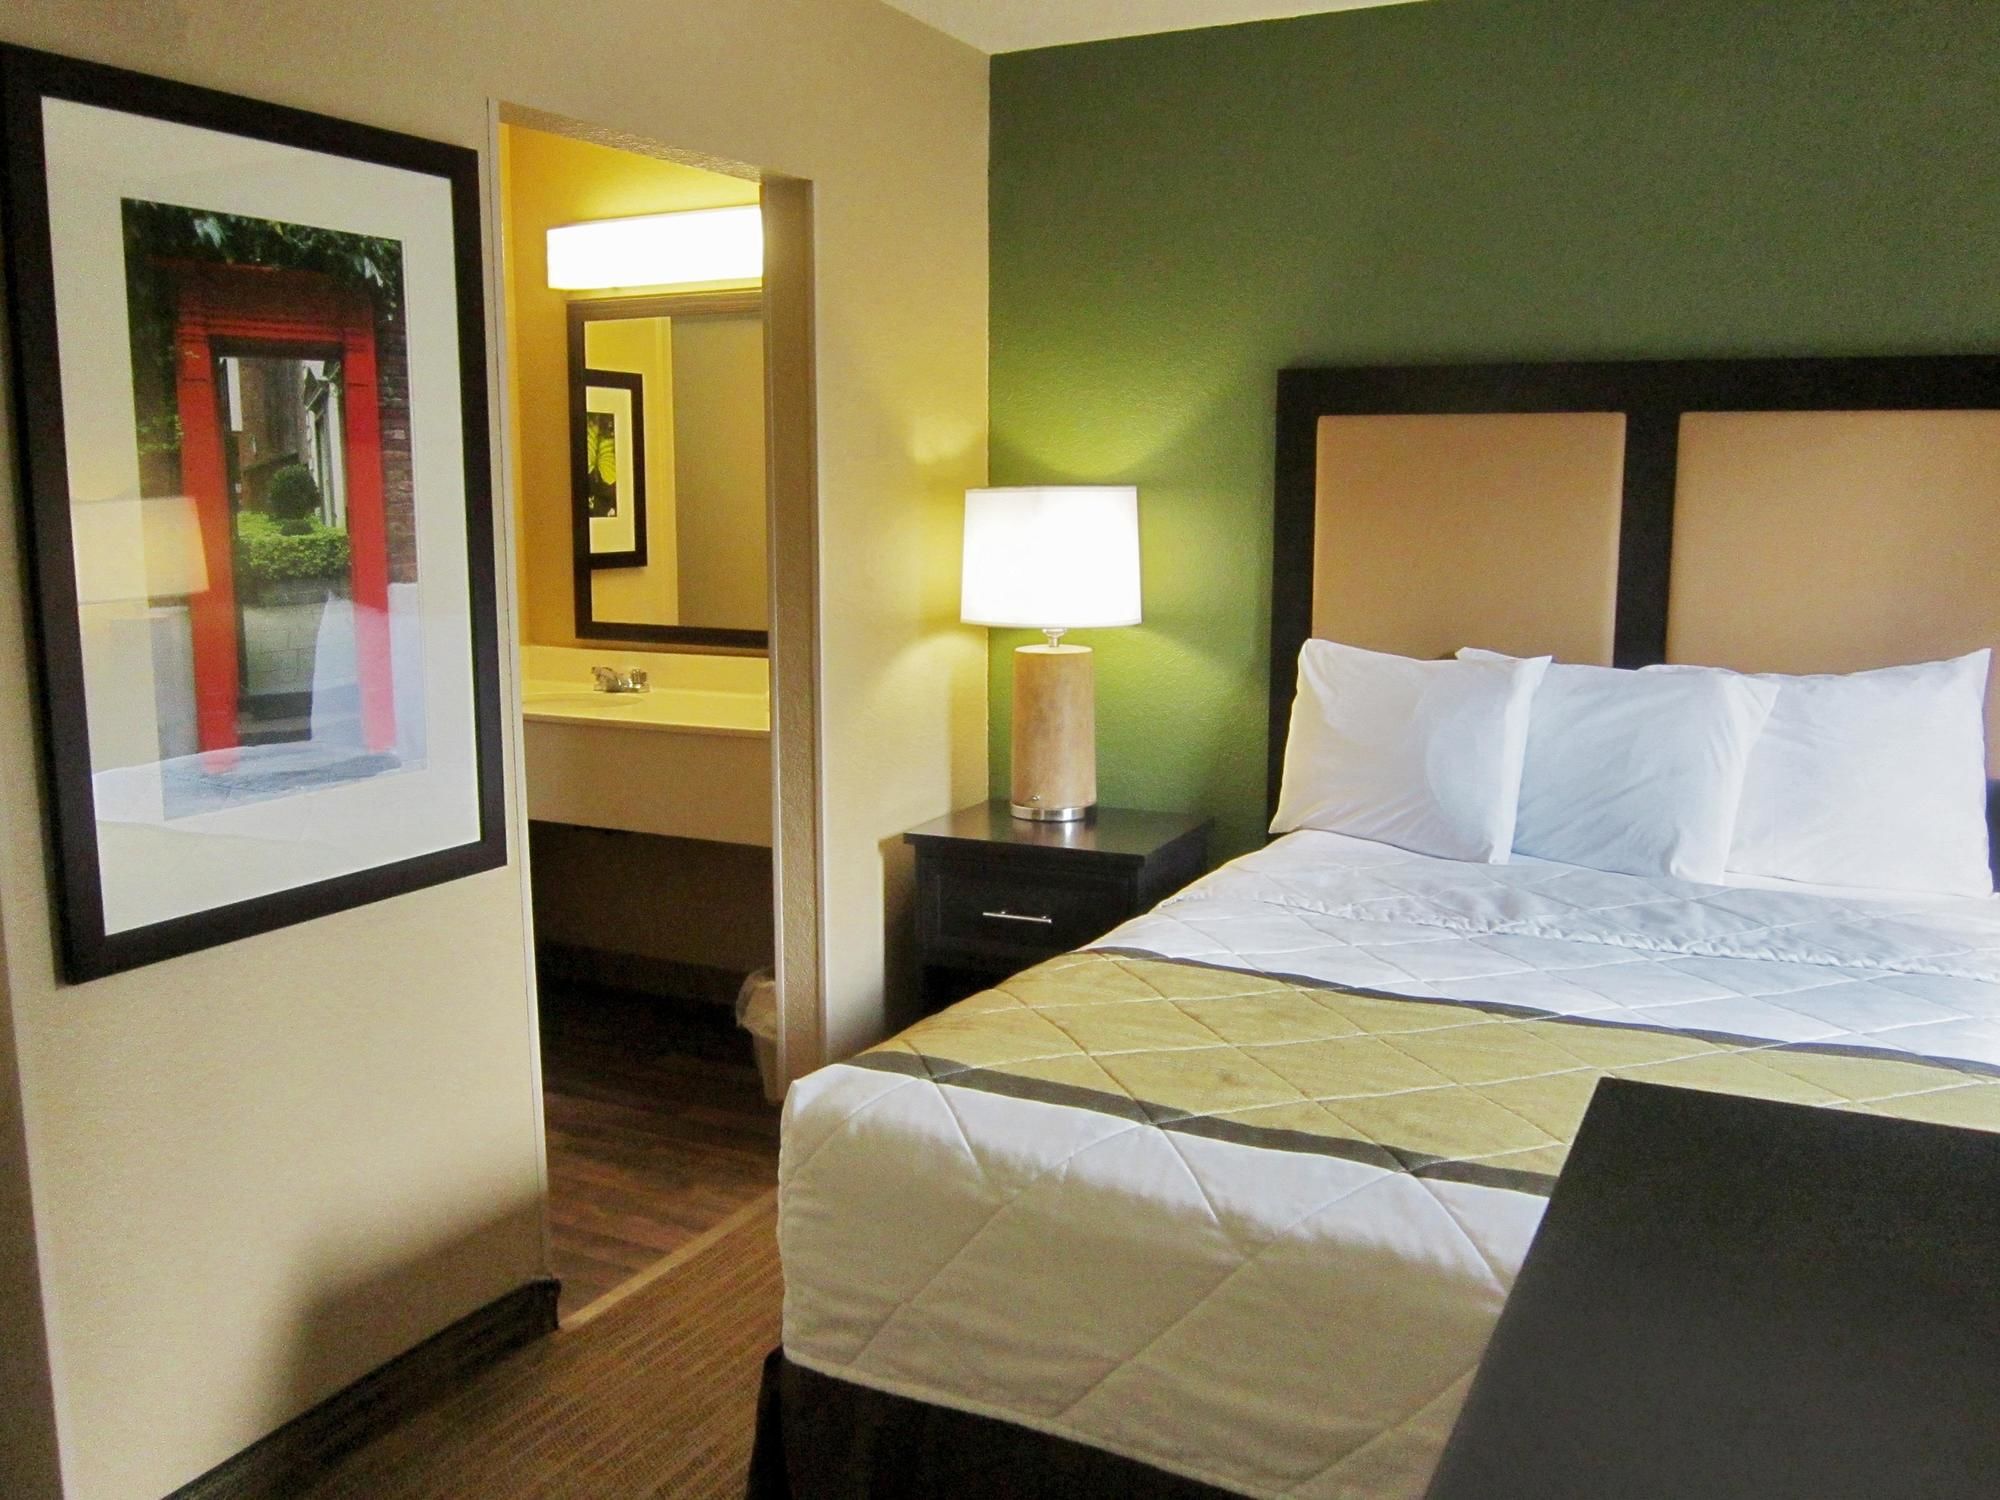 Extended Stay America Orlando Convention Ctr 6443 Westwood